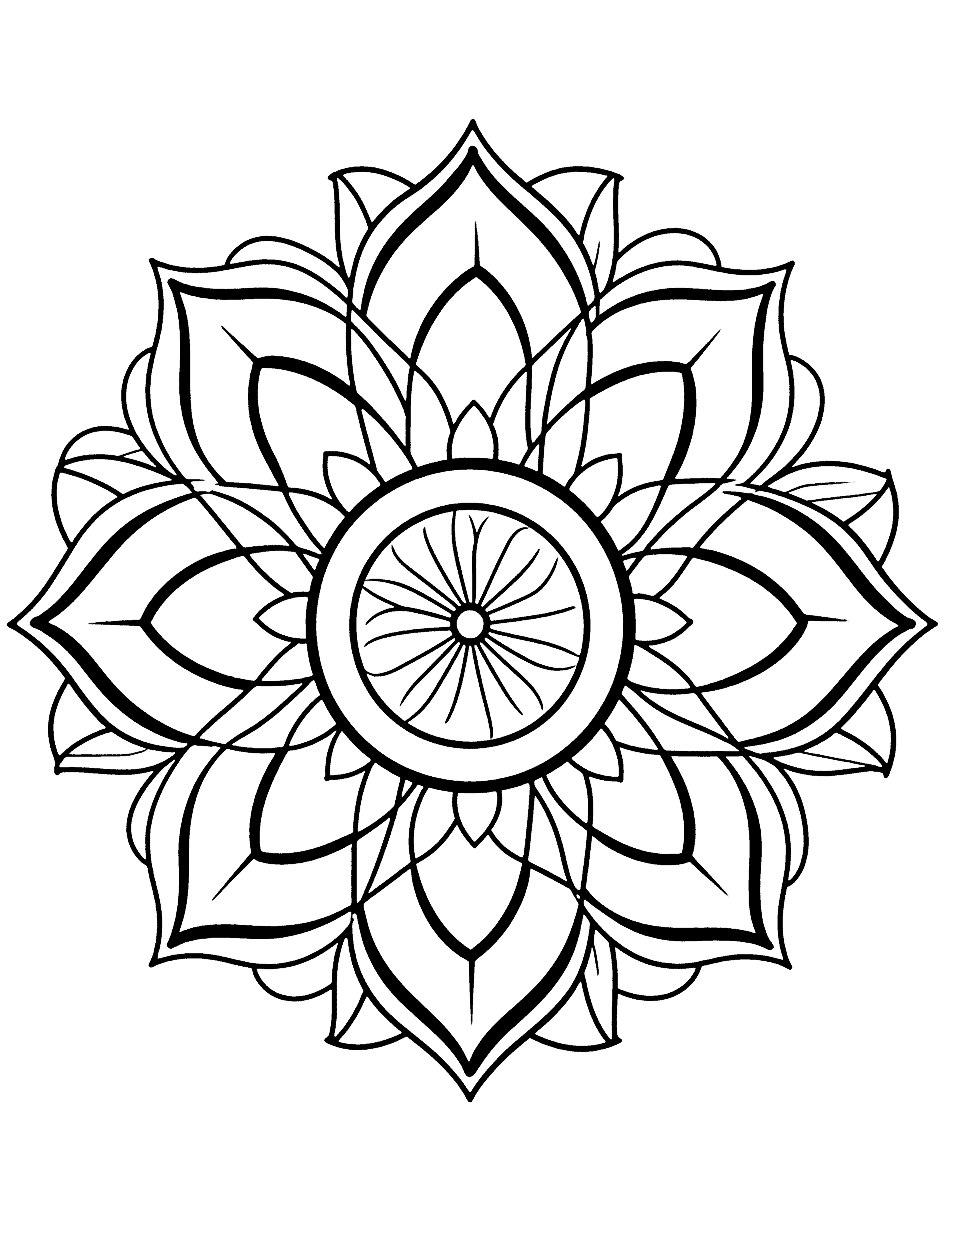 Beaming Sunflower Mandala Coloring Page - An easy and cheerful mandala design, perfect for beginner colorists.